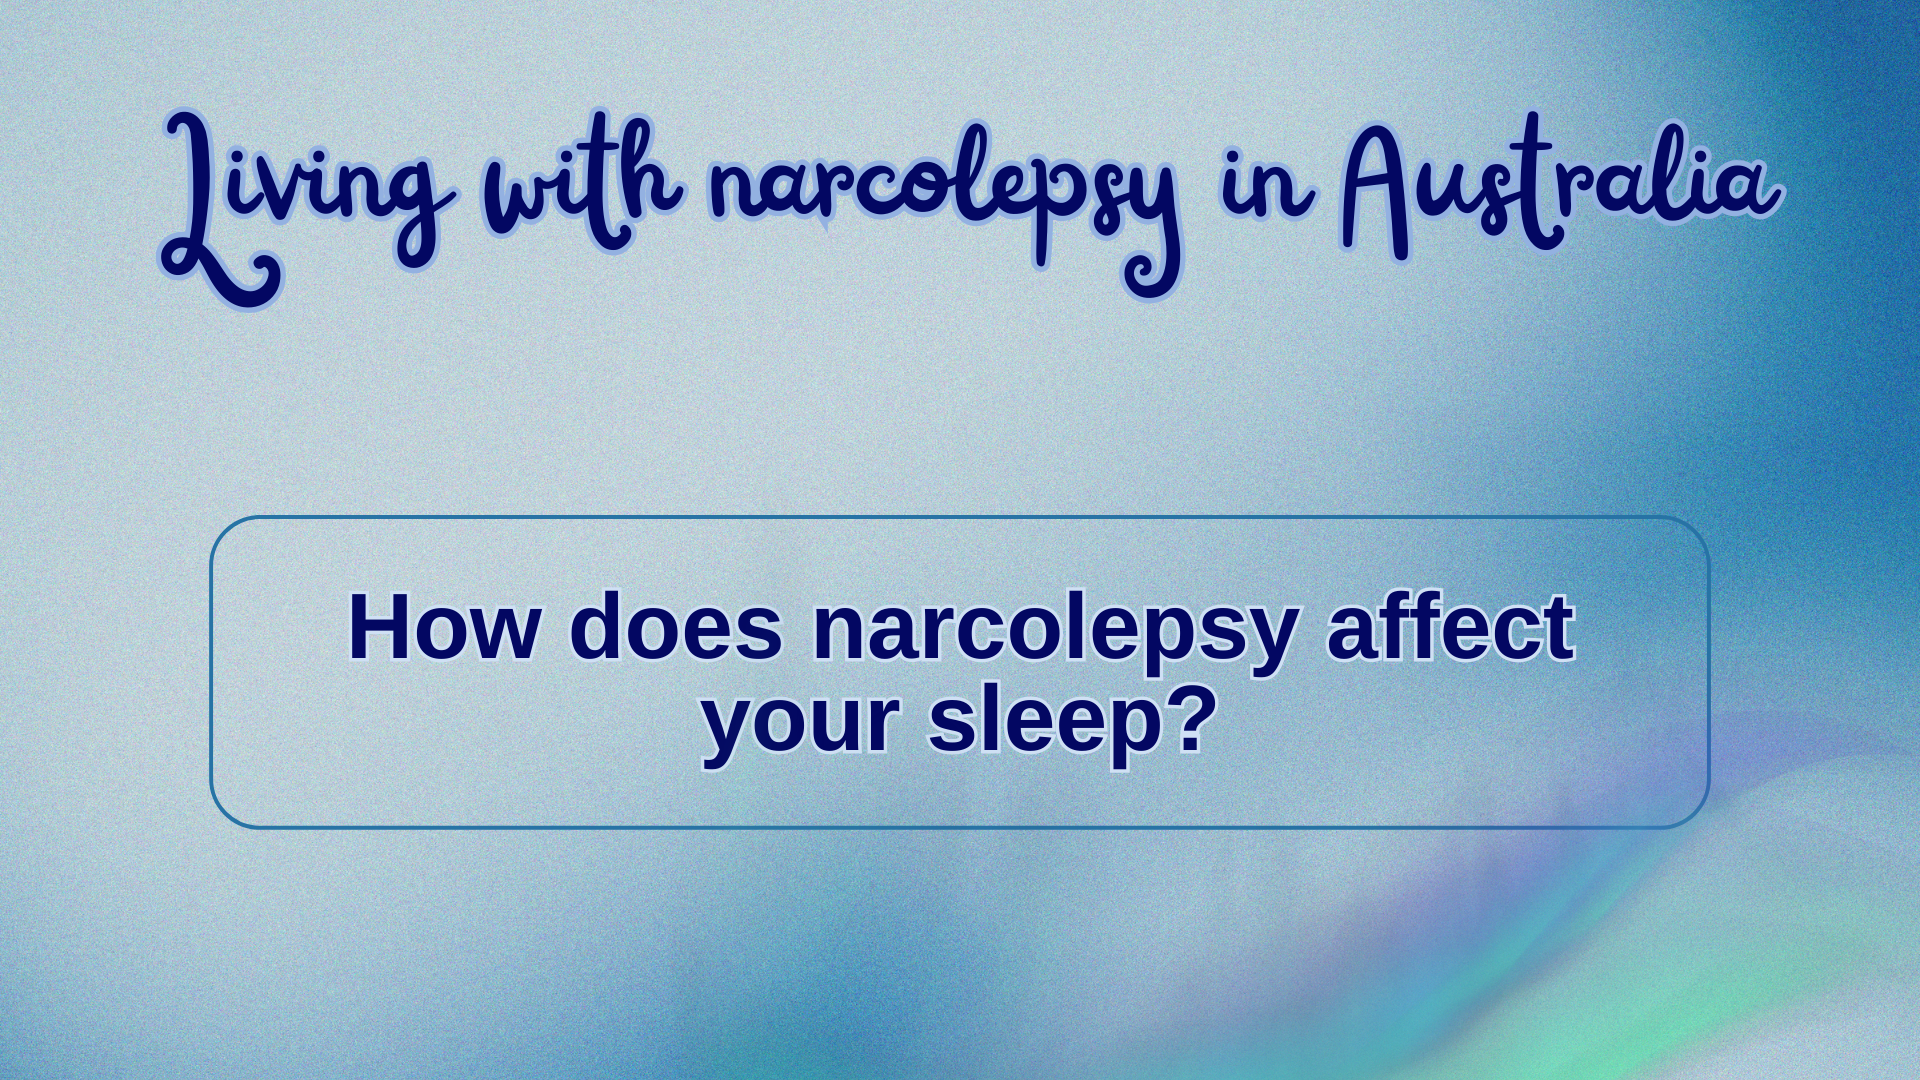 How does narcolepsy affect your sleep?